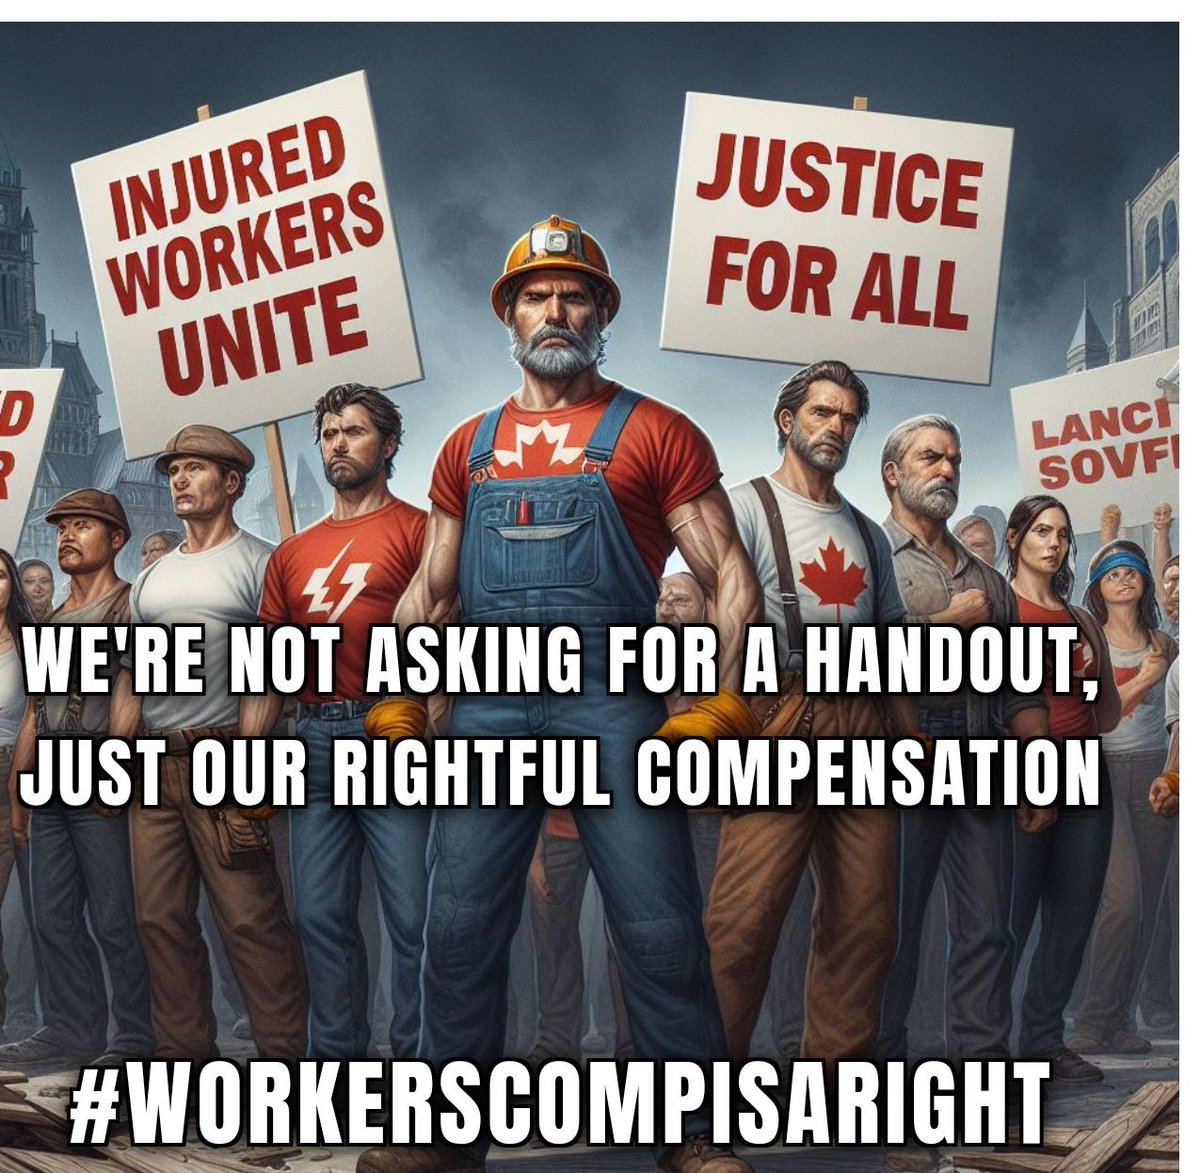 Injured workers: we're not asking for a handout, just our rightful compensation. Fair treatment is not too much to ask for! #WorkersCompIsARight #InjuredWorkers #FairTreatment